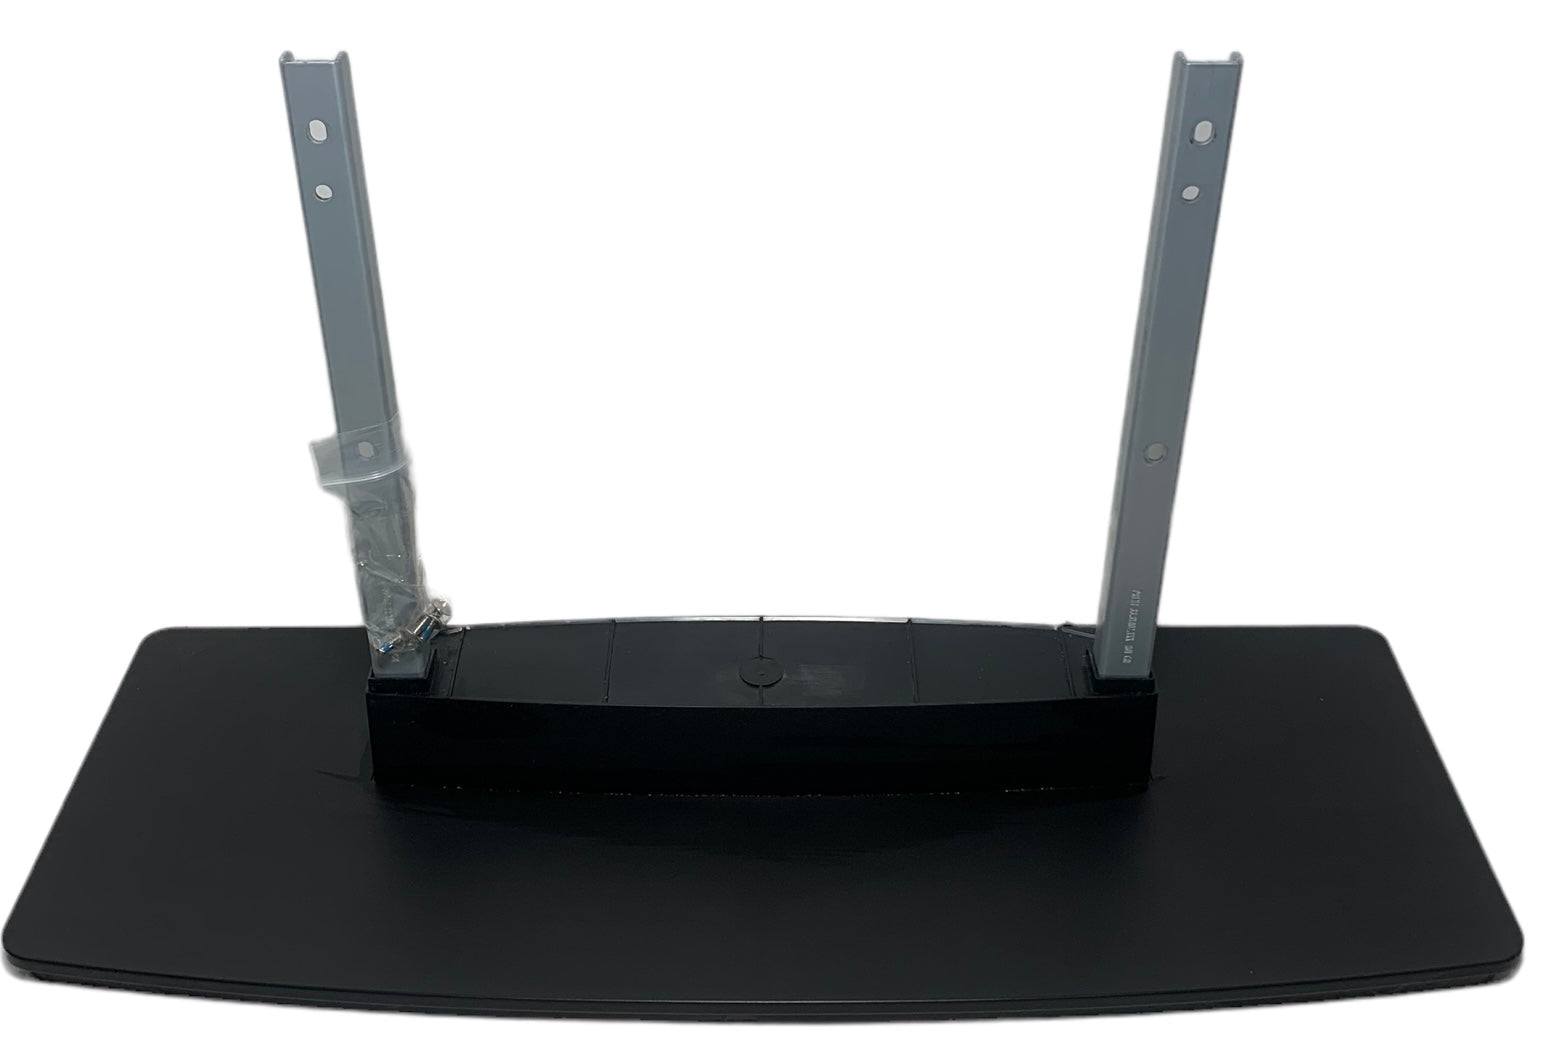 Westinghouse SK-32H520S TV Stand/Base